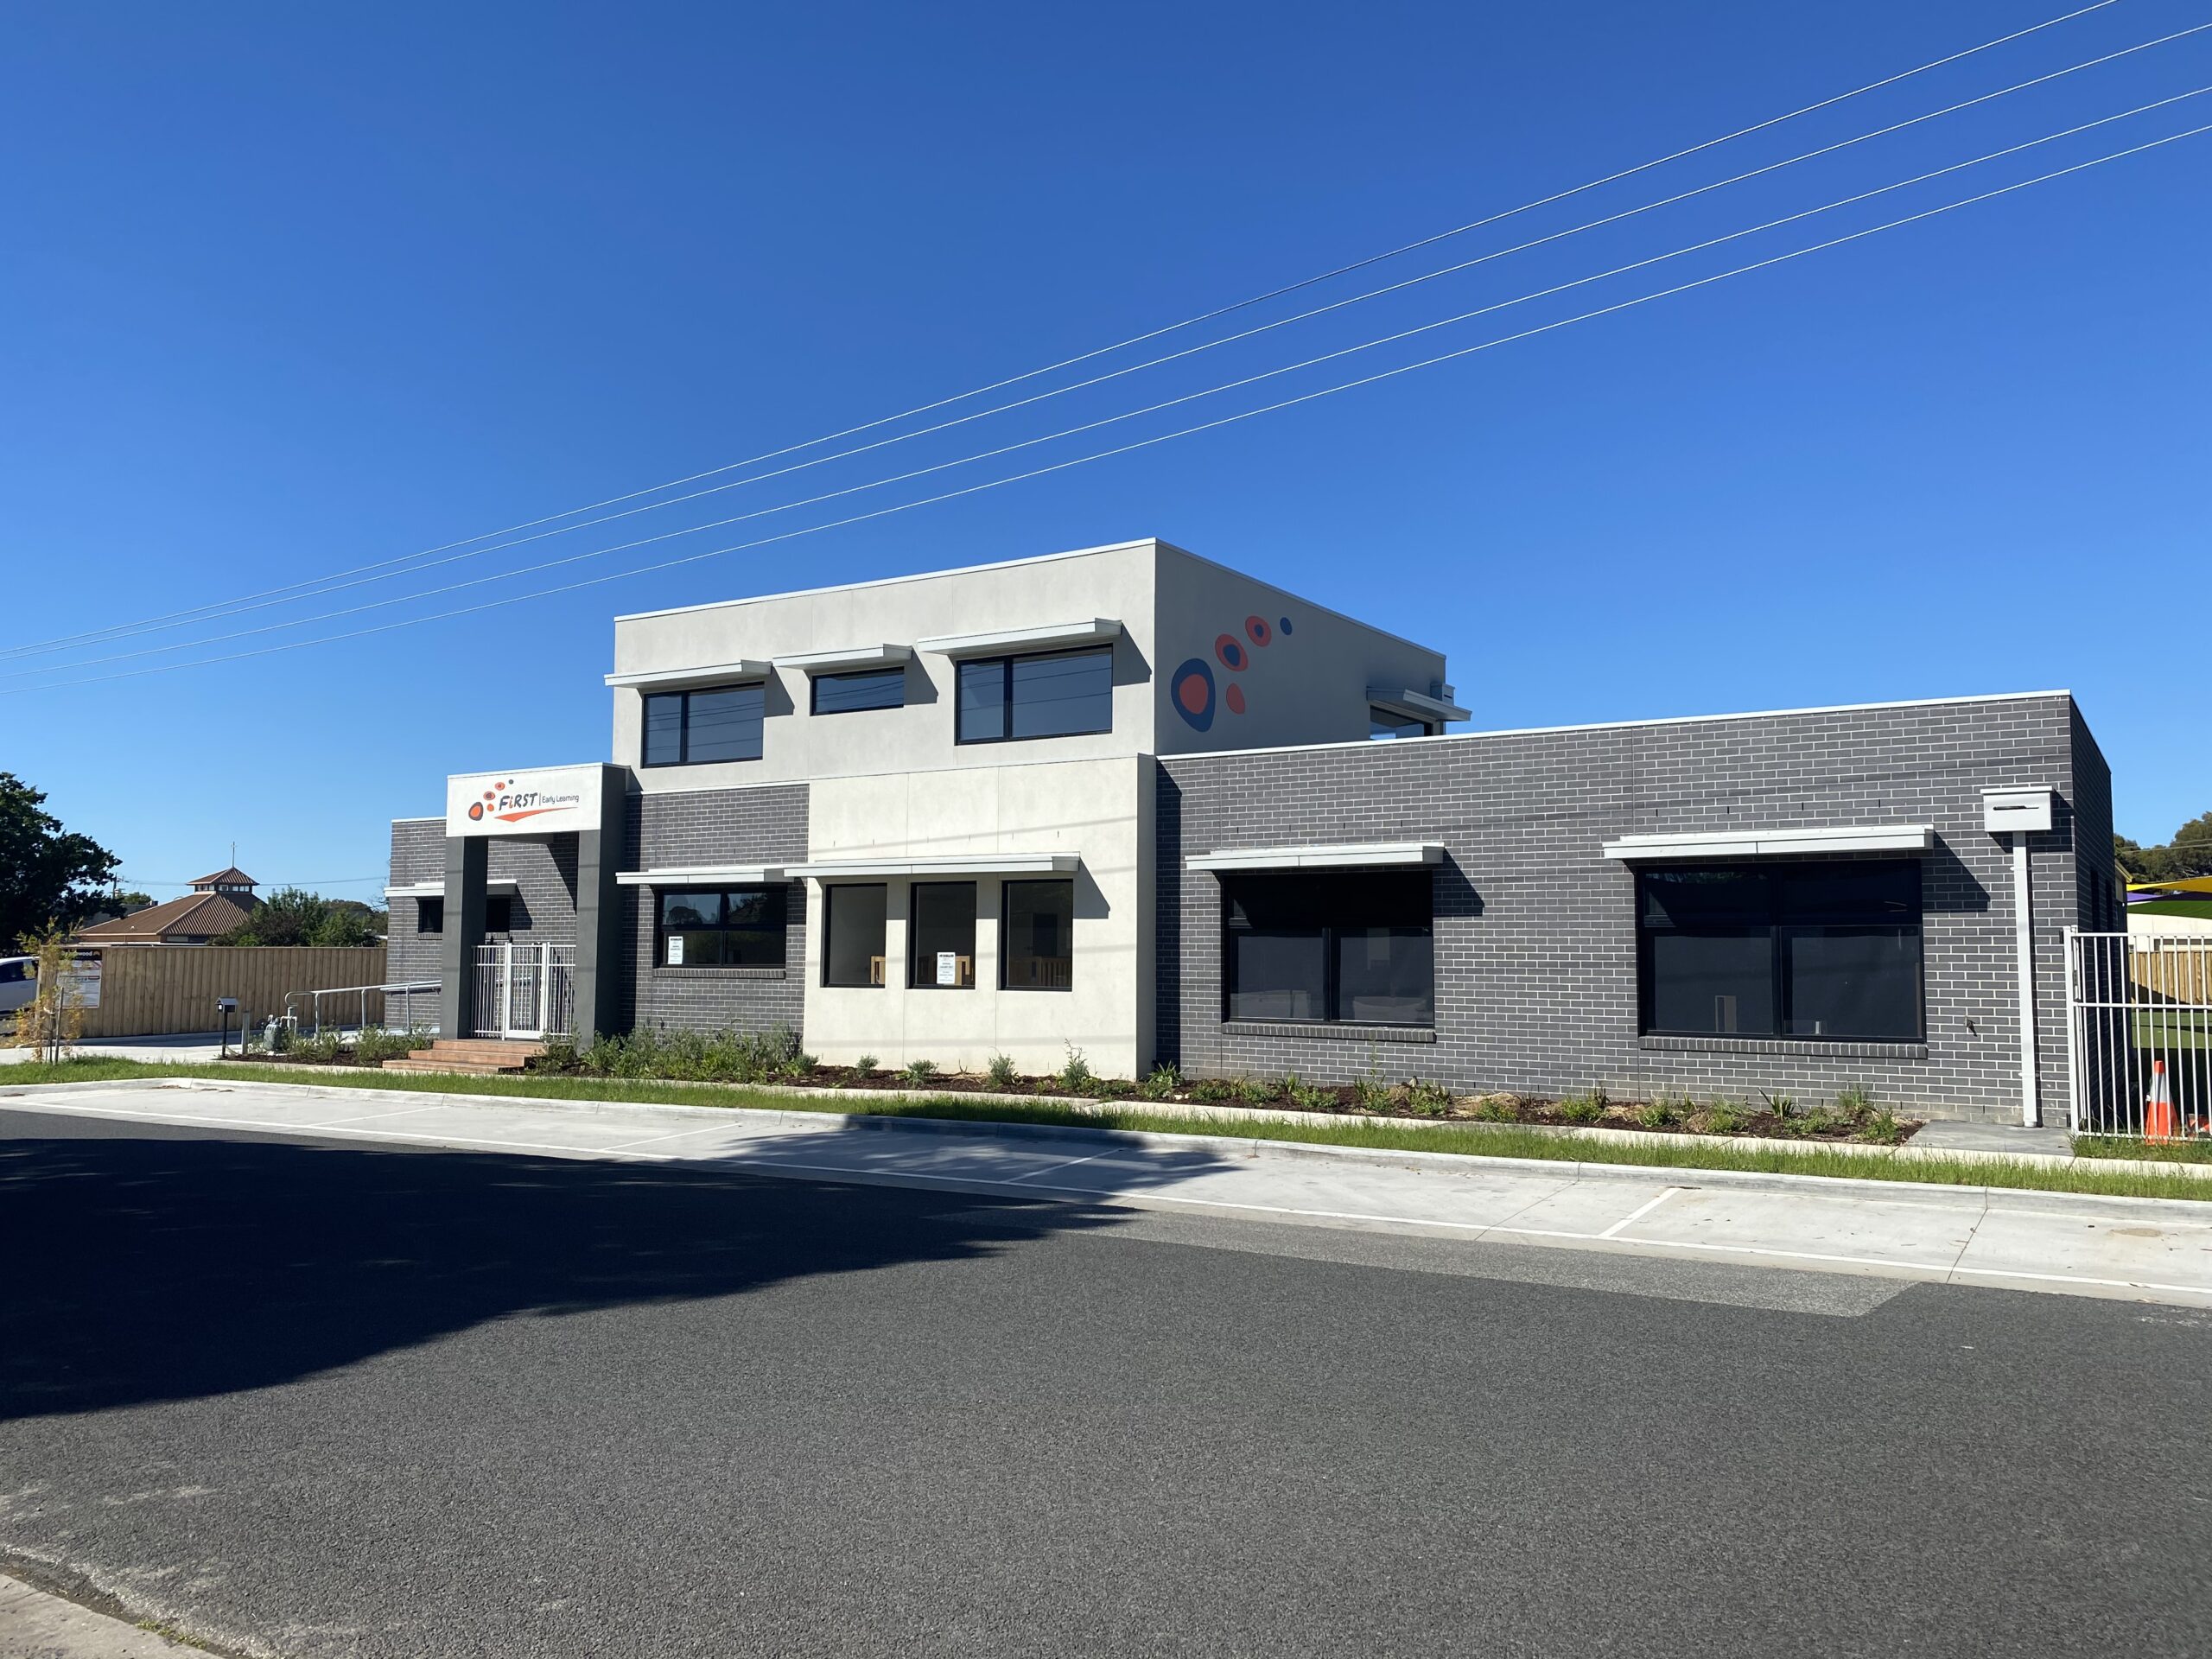 FiRST Early Learning Pakenham